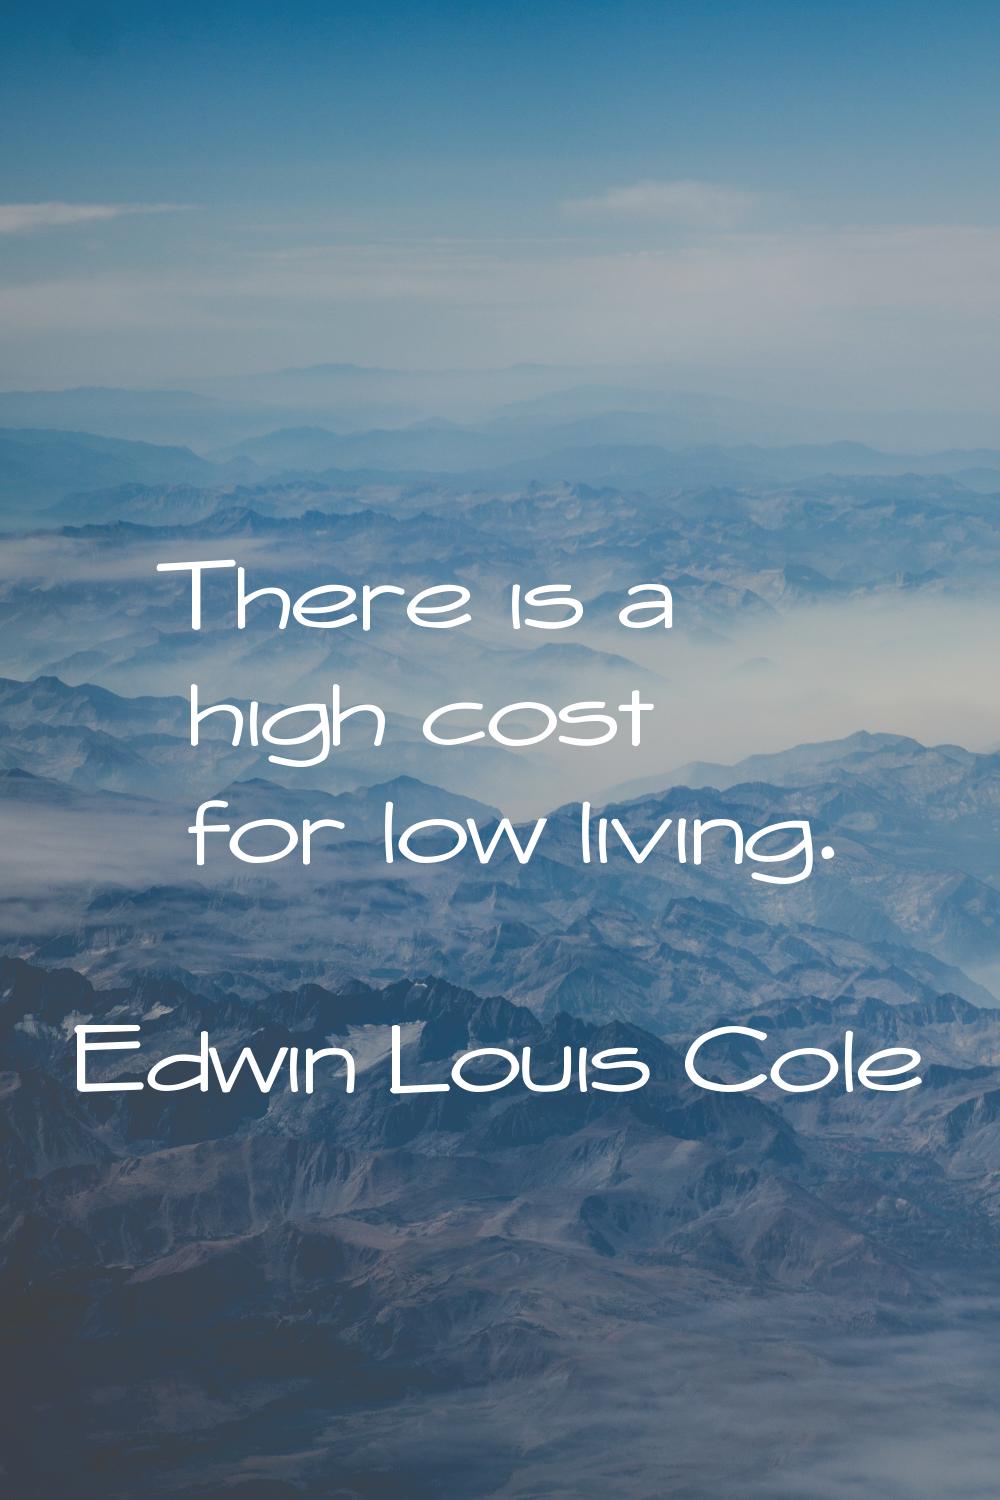 There is a high cost for low living.